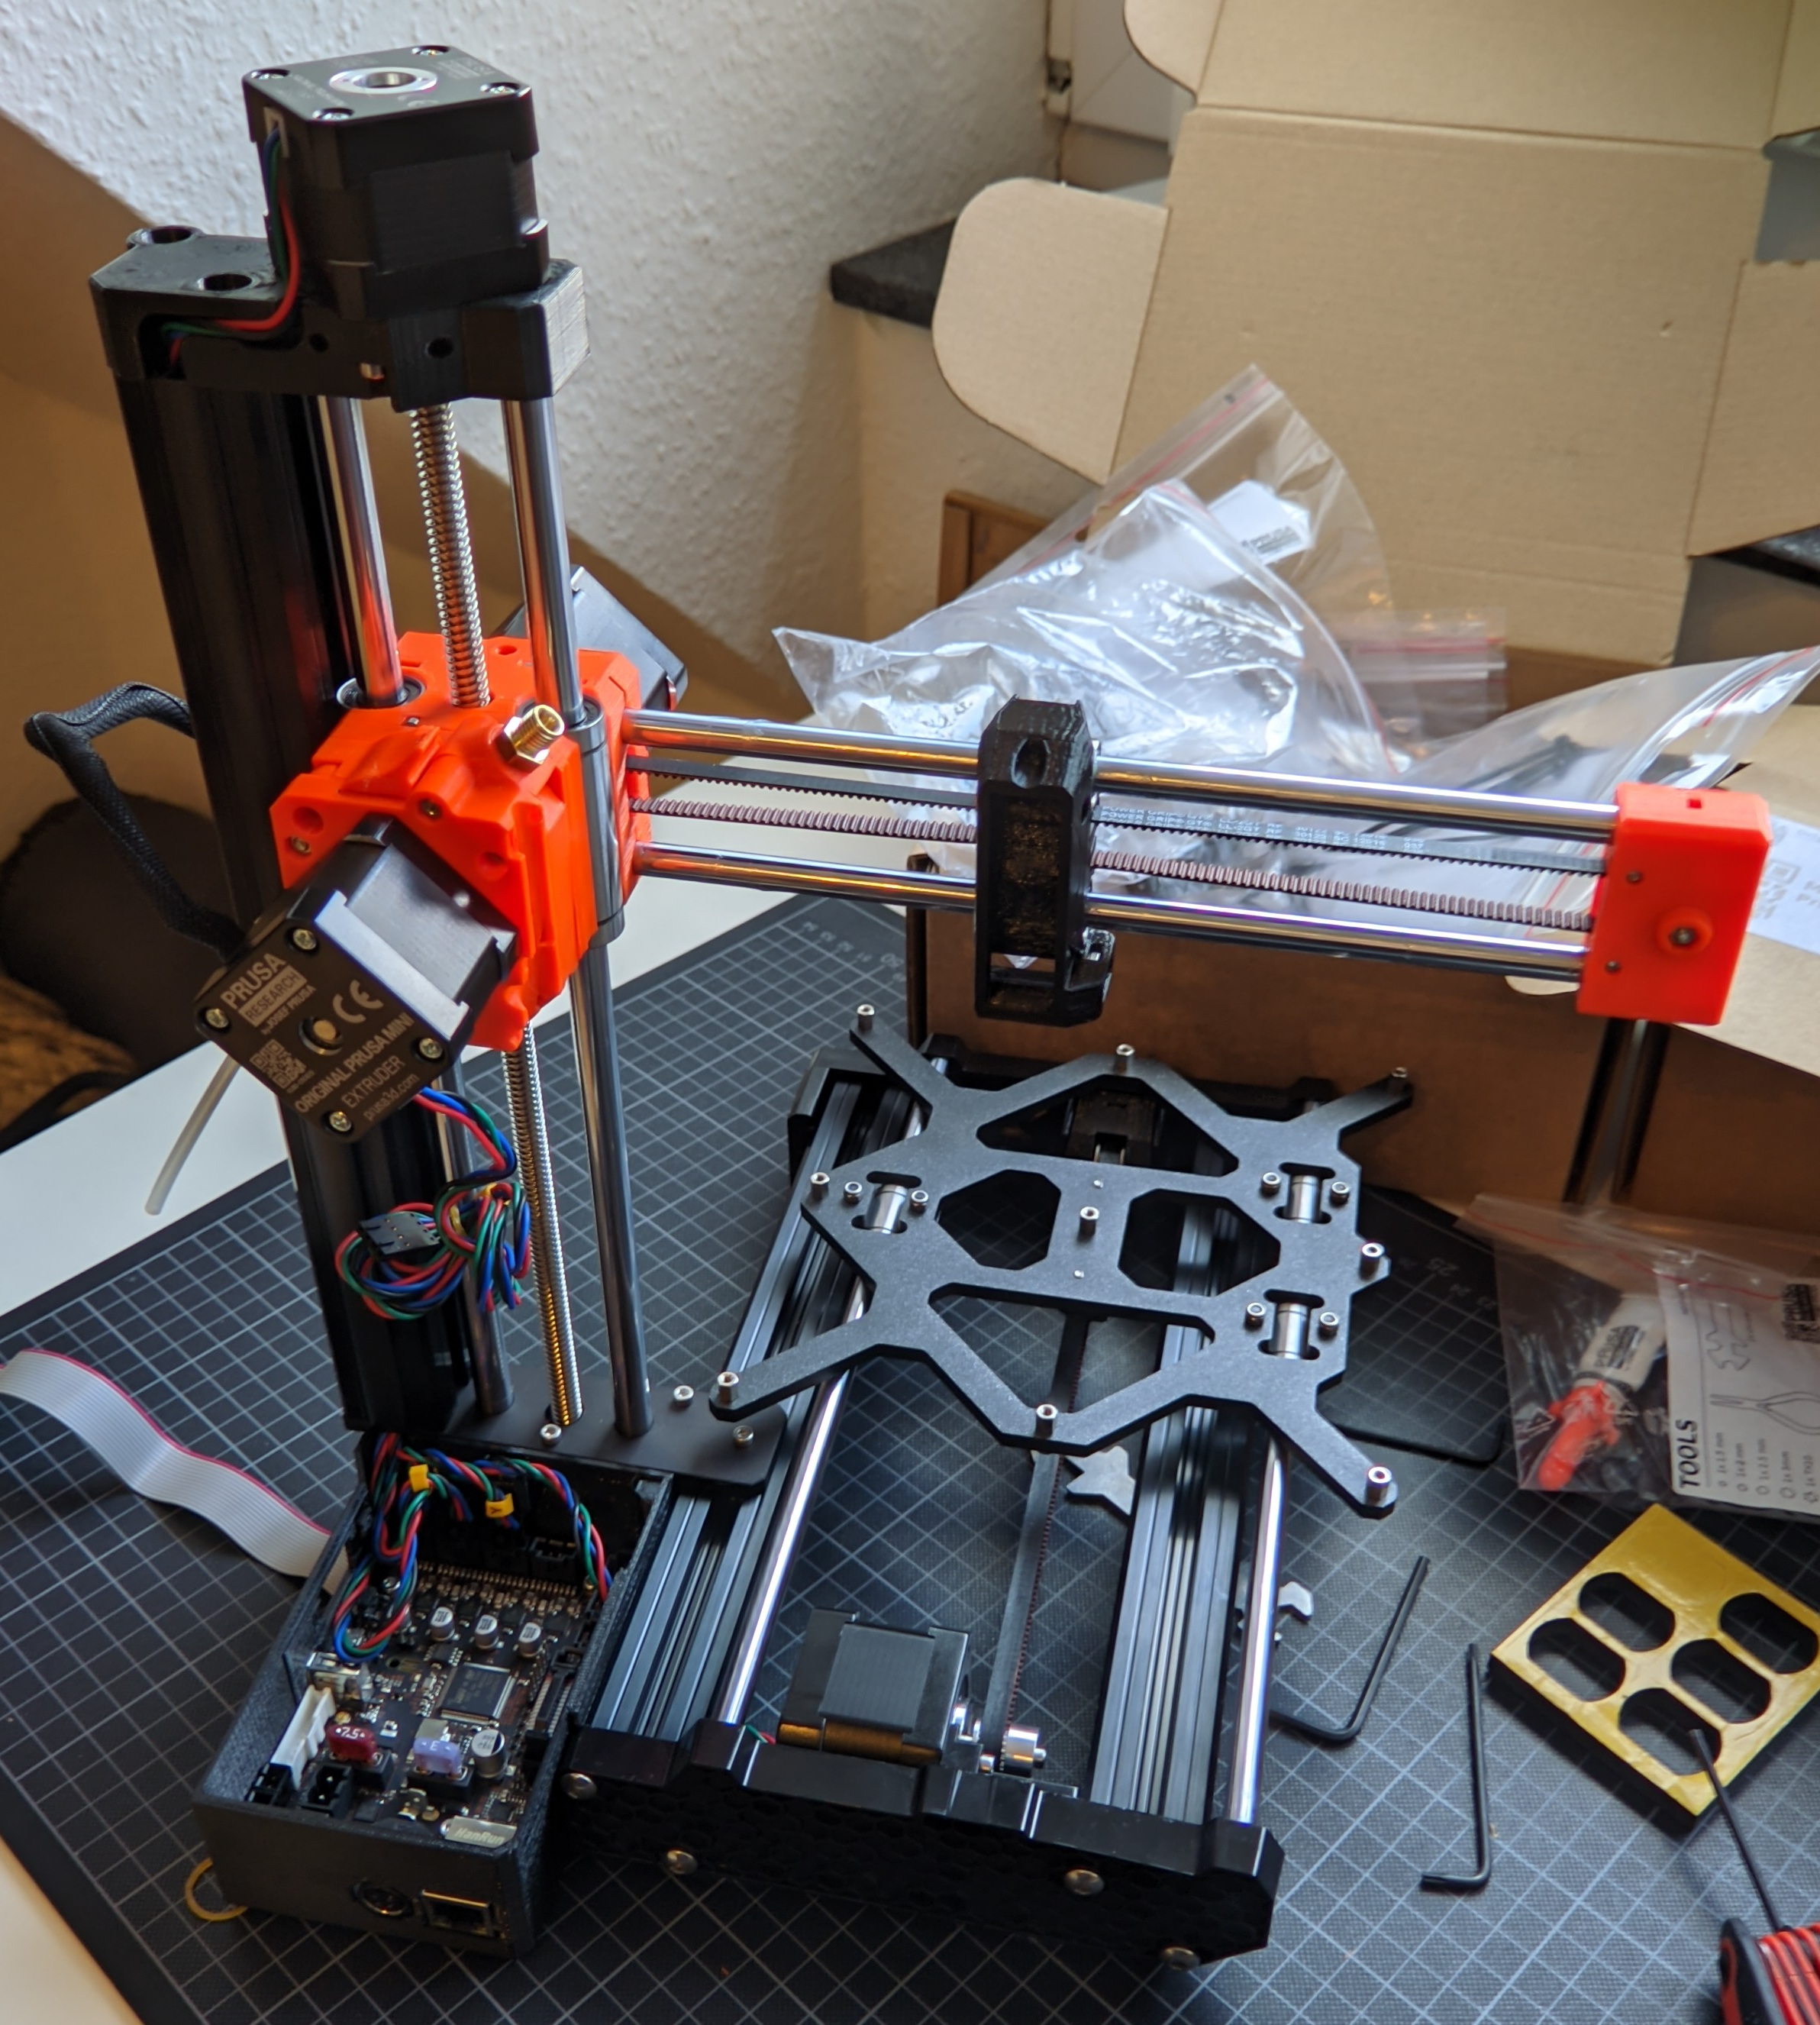 Building a Prusa Mini+ - End of Session 2